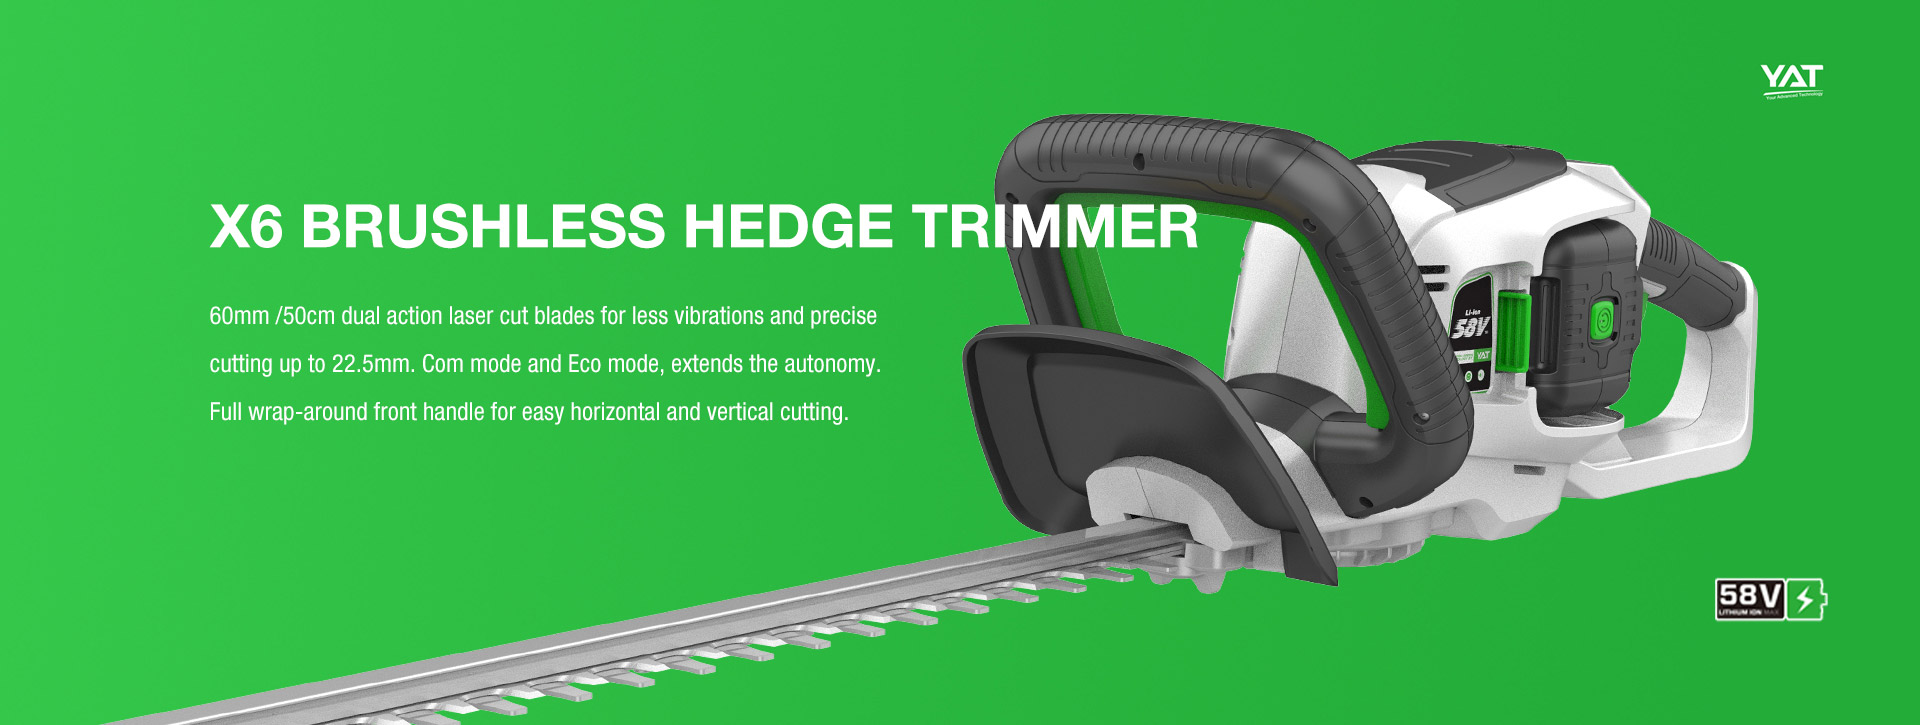 X6 BRUSHLESS HEDGE TRIMMER